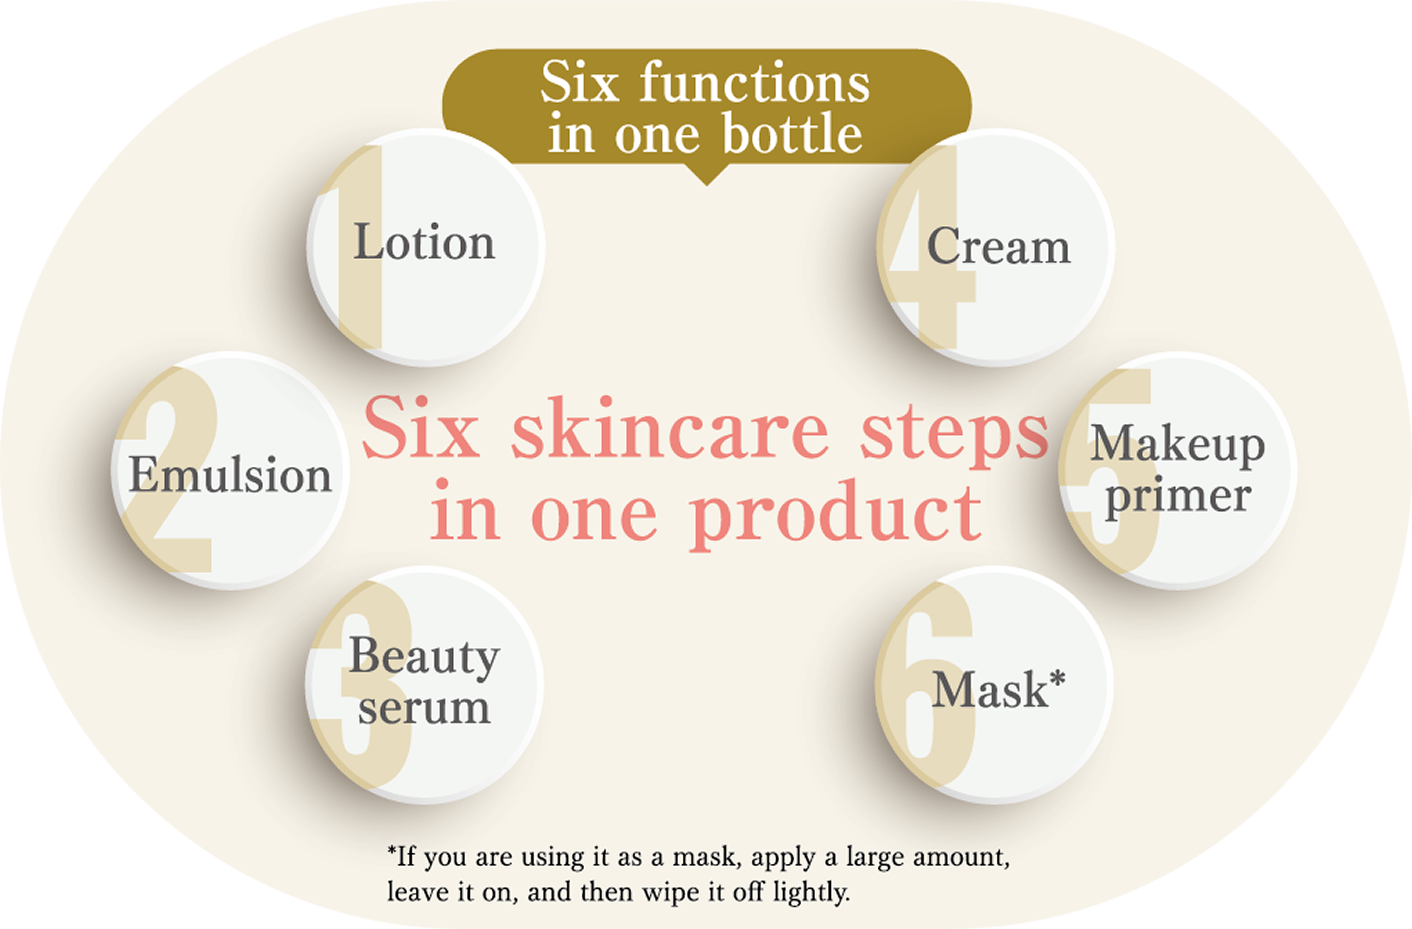 Six skincare steps in one product